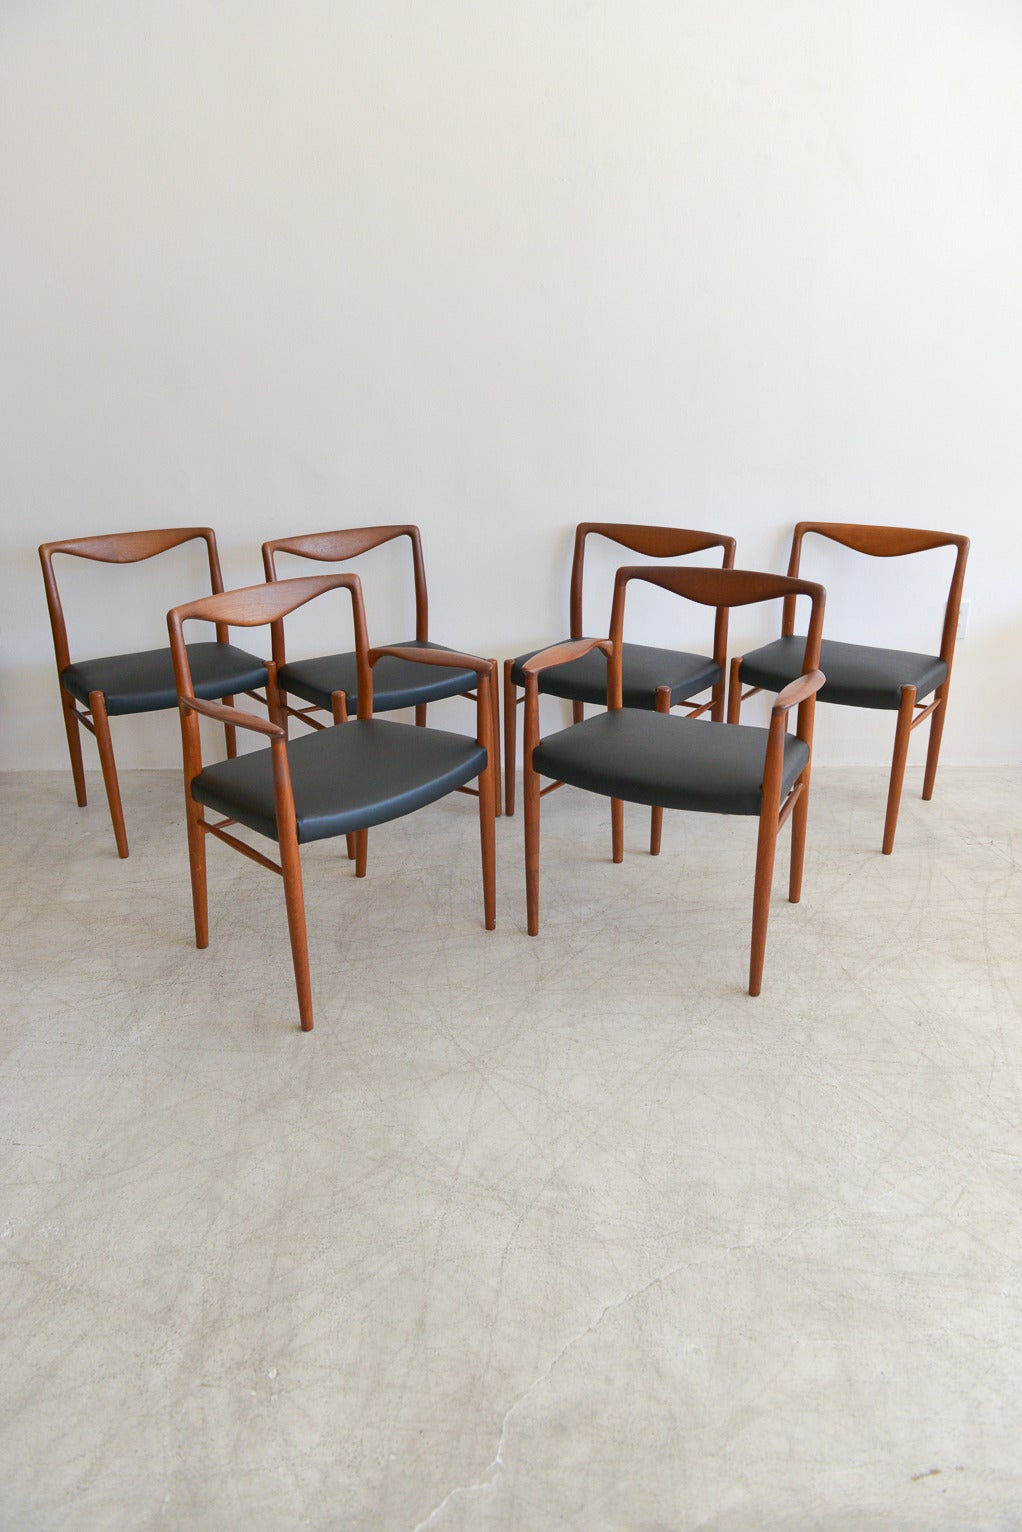 Made of solid sculpted teak, these beautifully sculpted chairs are artfully sculpted with delicate curves and backrests.

Designed by Kai Lyngfeldt Larsen for Søren Willadsen in the 1960s. Excellent vintage condition, newly recovered with black